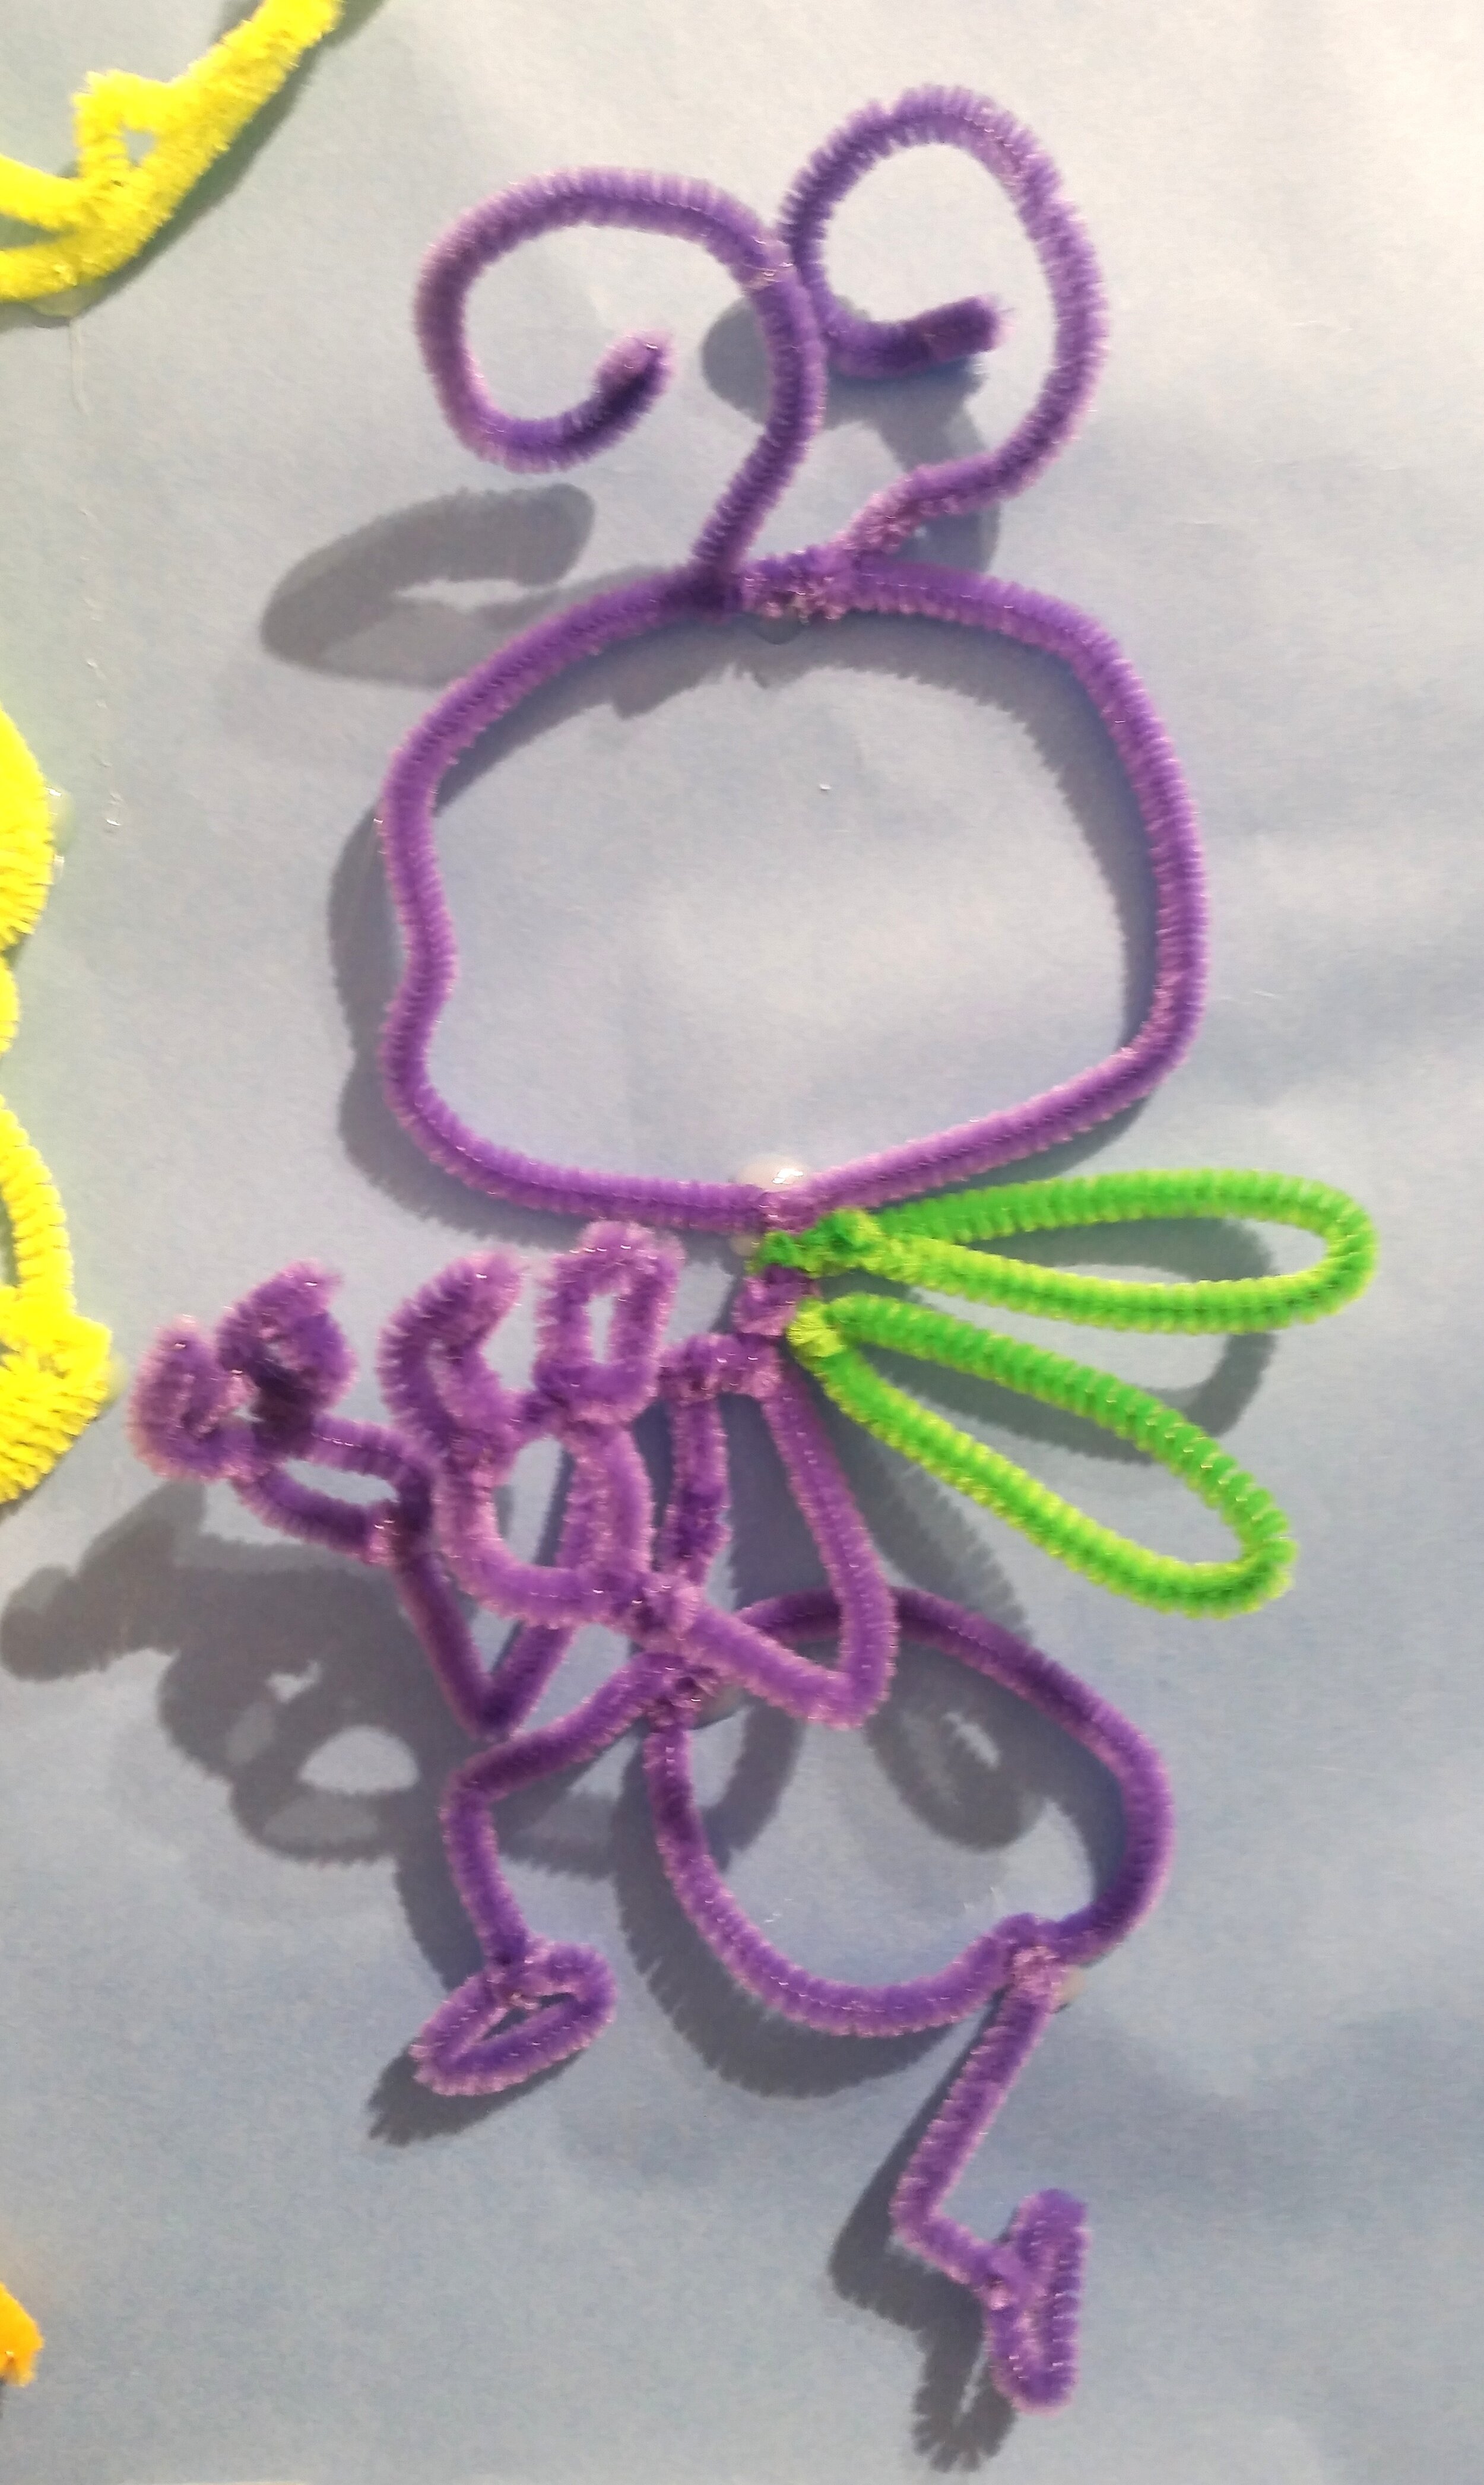 Colin Samuel_A Bug's Life_Pipe Cleaners and Wire on Paper_detail_2.jpg